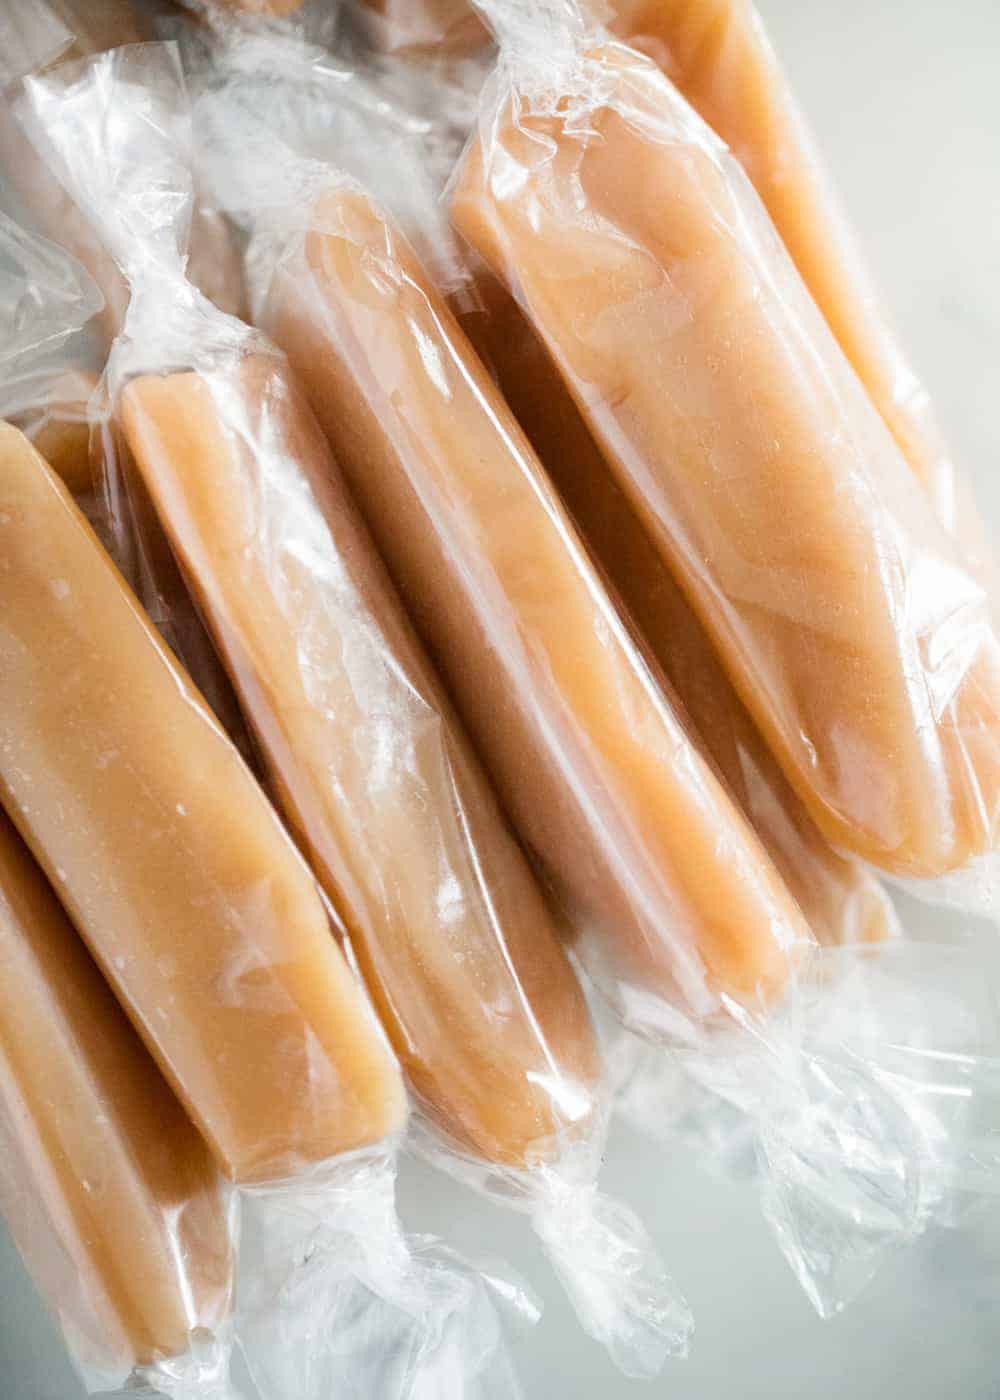 caramel candies wrapped in cellophane 